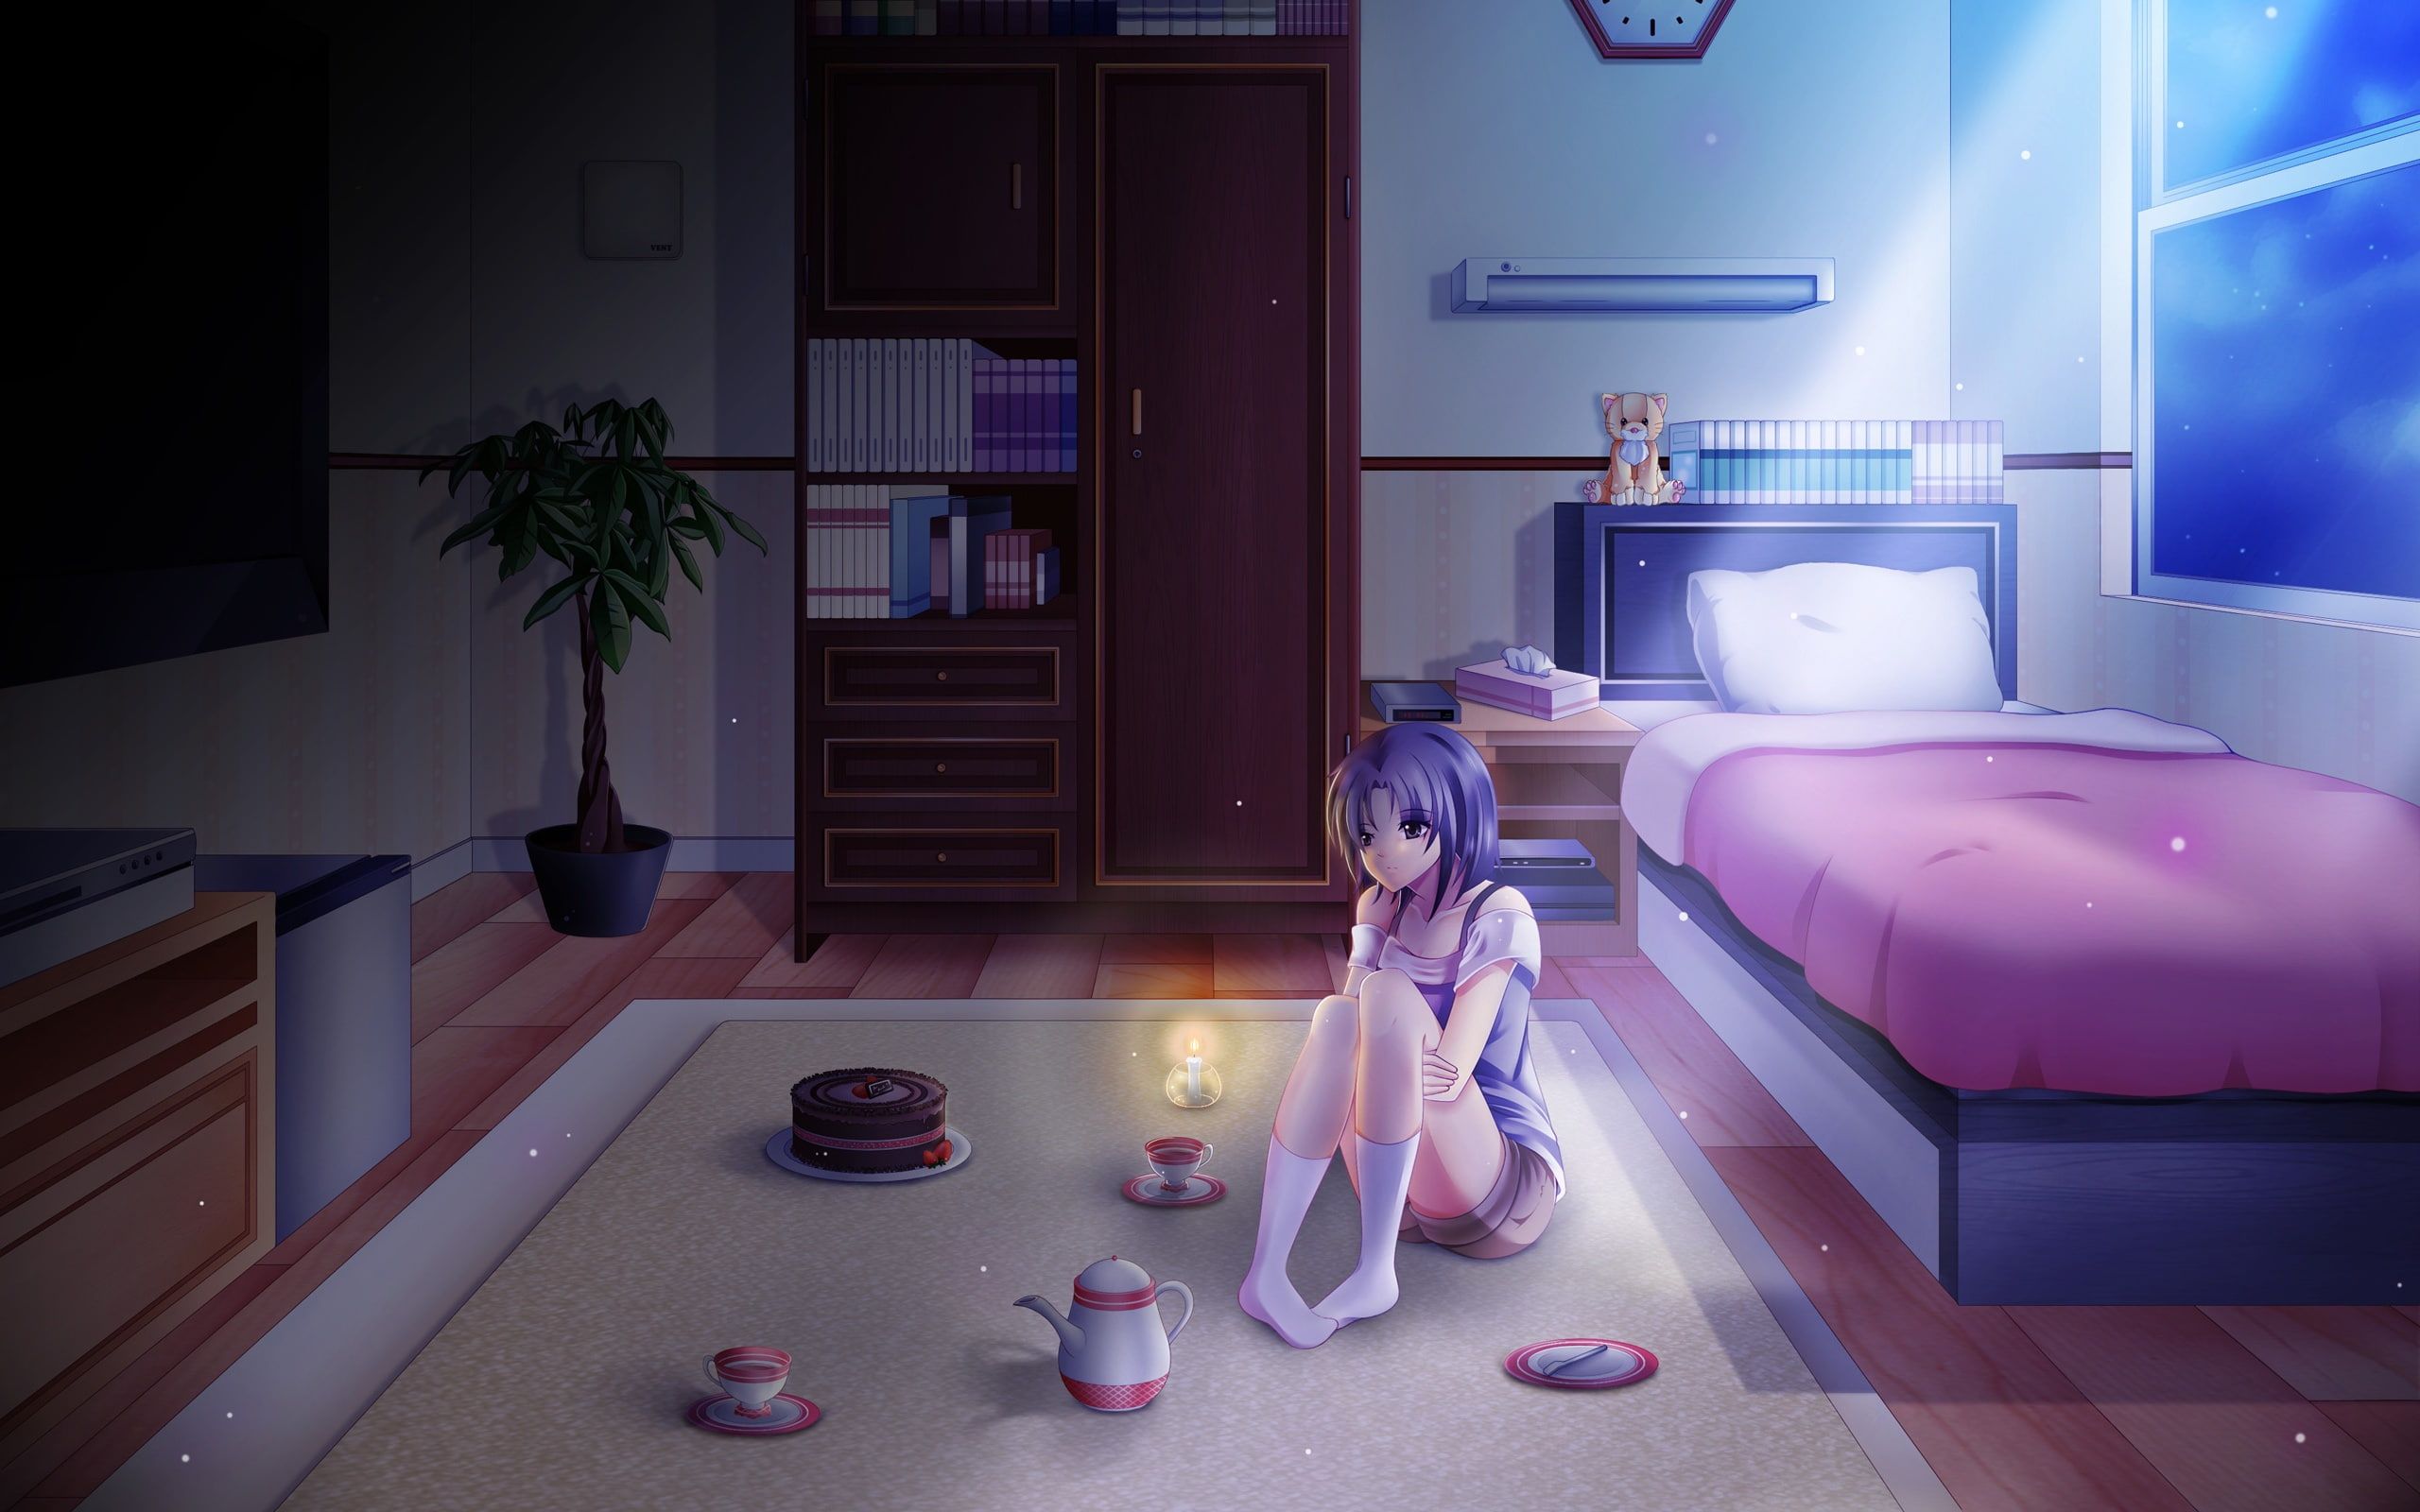 Free download. HD wallpaper: Lonely night, anime girl at bedroom